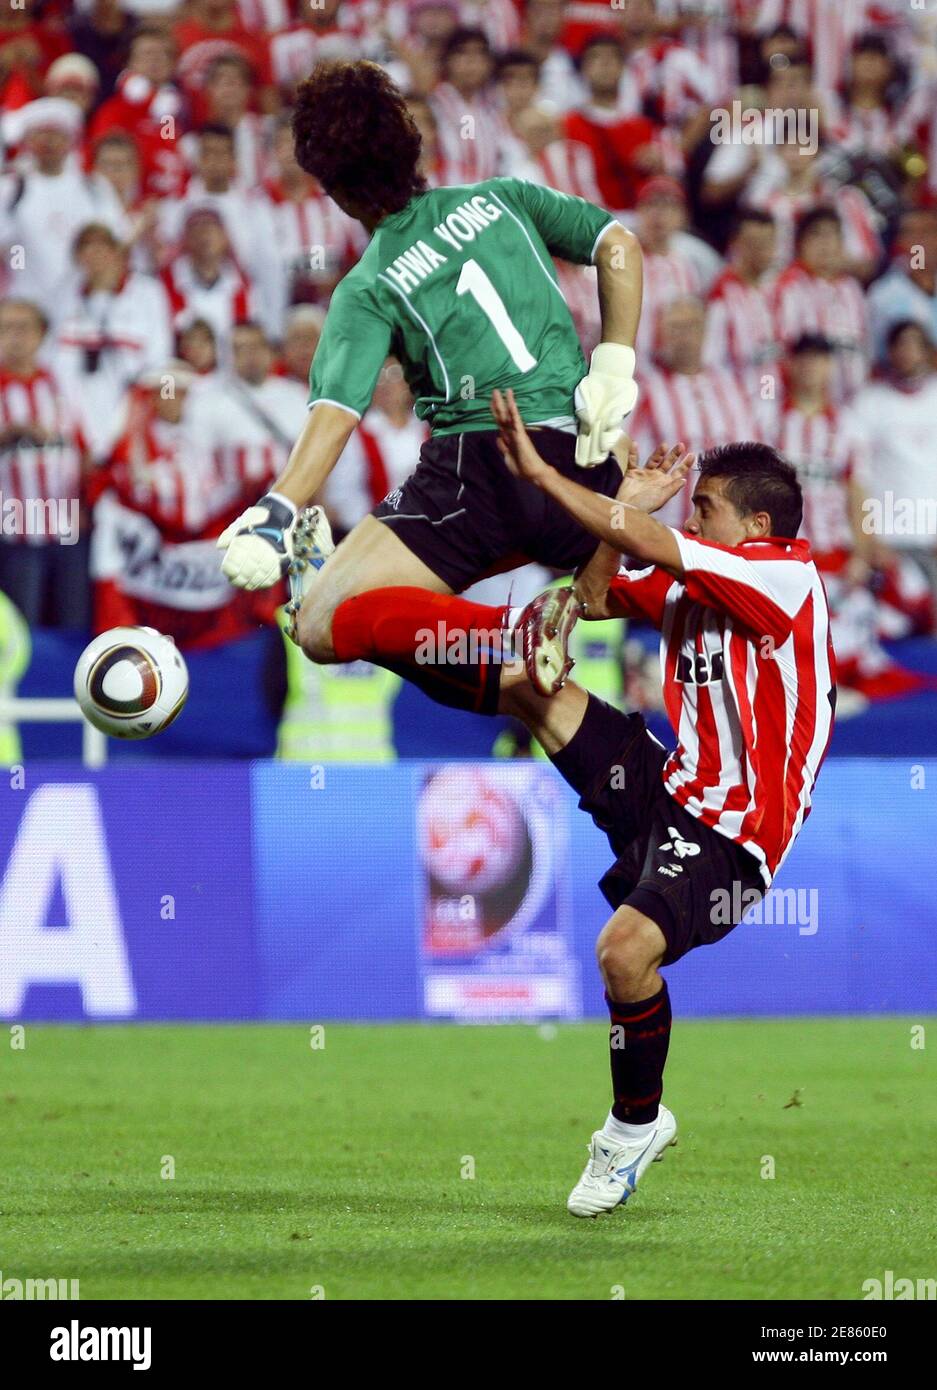 Estudiantes' Maxi Nunez (R) collides with Pohang Steelers' goalkeeper Shin Hwa Yong during their FIFA Club World Cup semi-final soccer match at Mohammed bin Zayed stadium in Abu Dhabi December 15, 2009. REUTERS/Fahad Shadeed (UNITED ARAB EMIRATES - Tags: SPORT SOCCER) Stock Photo